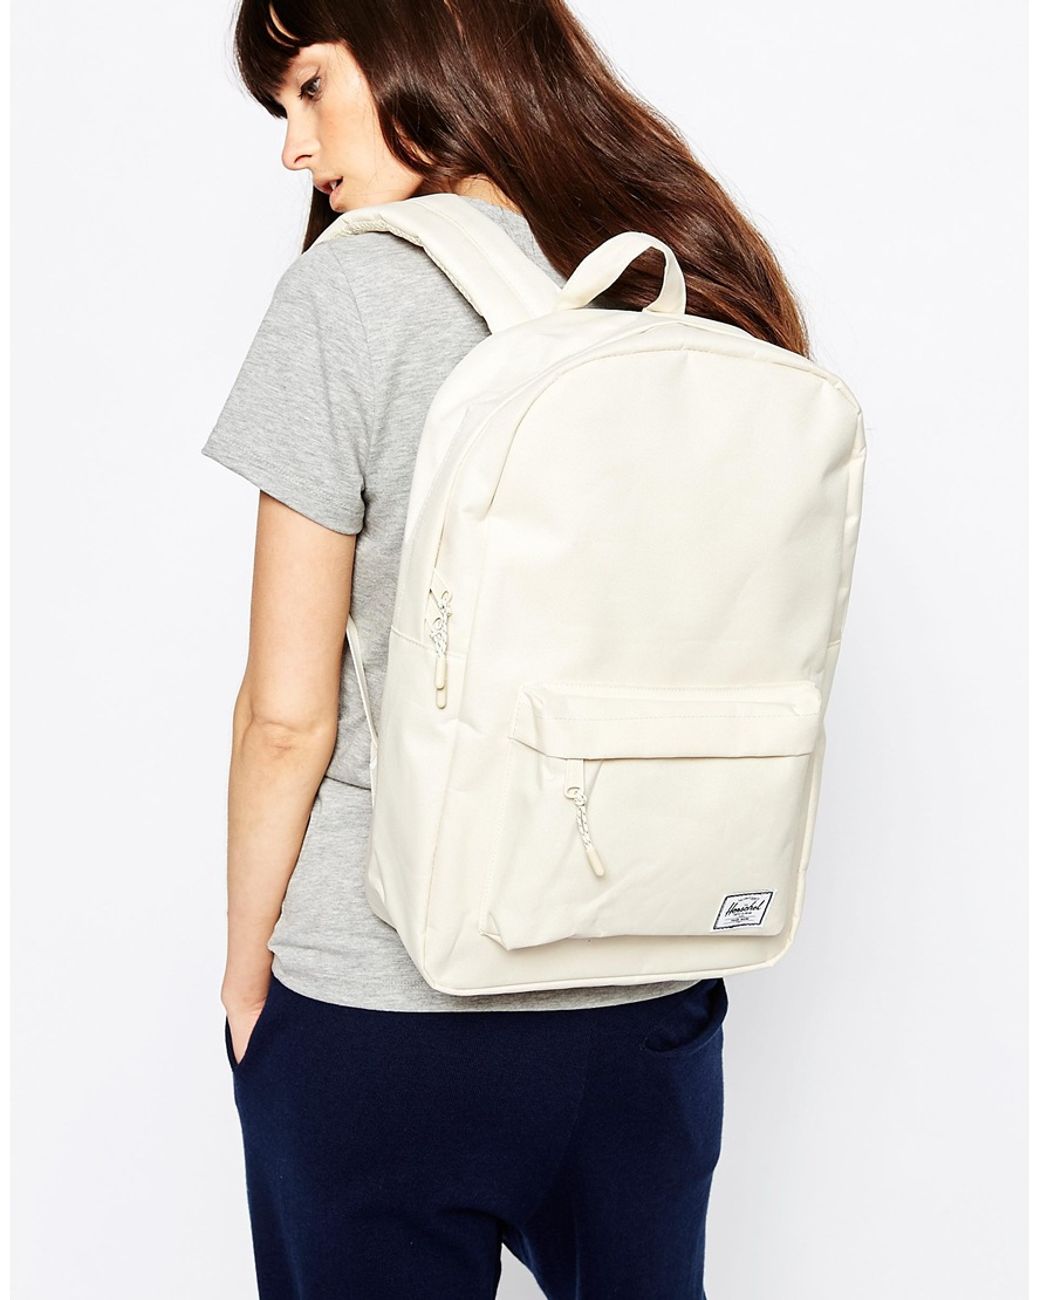 Herschel Supply Co. Classic Backpack In Cream in Natural | Lyst